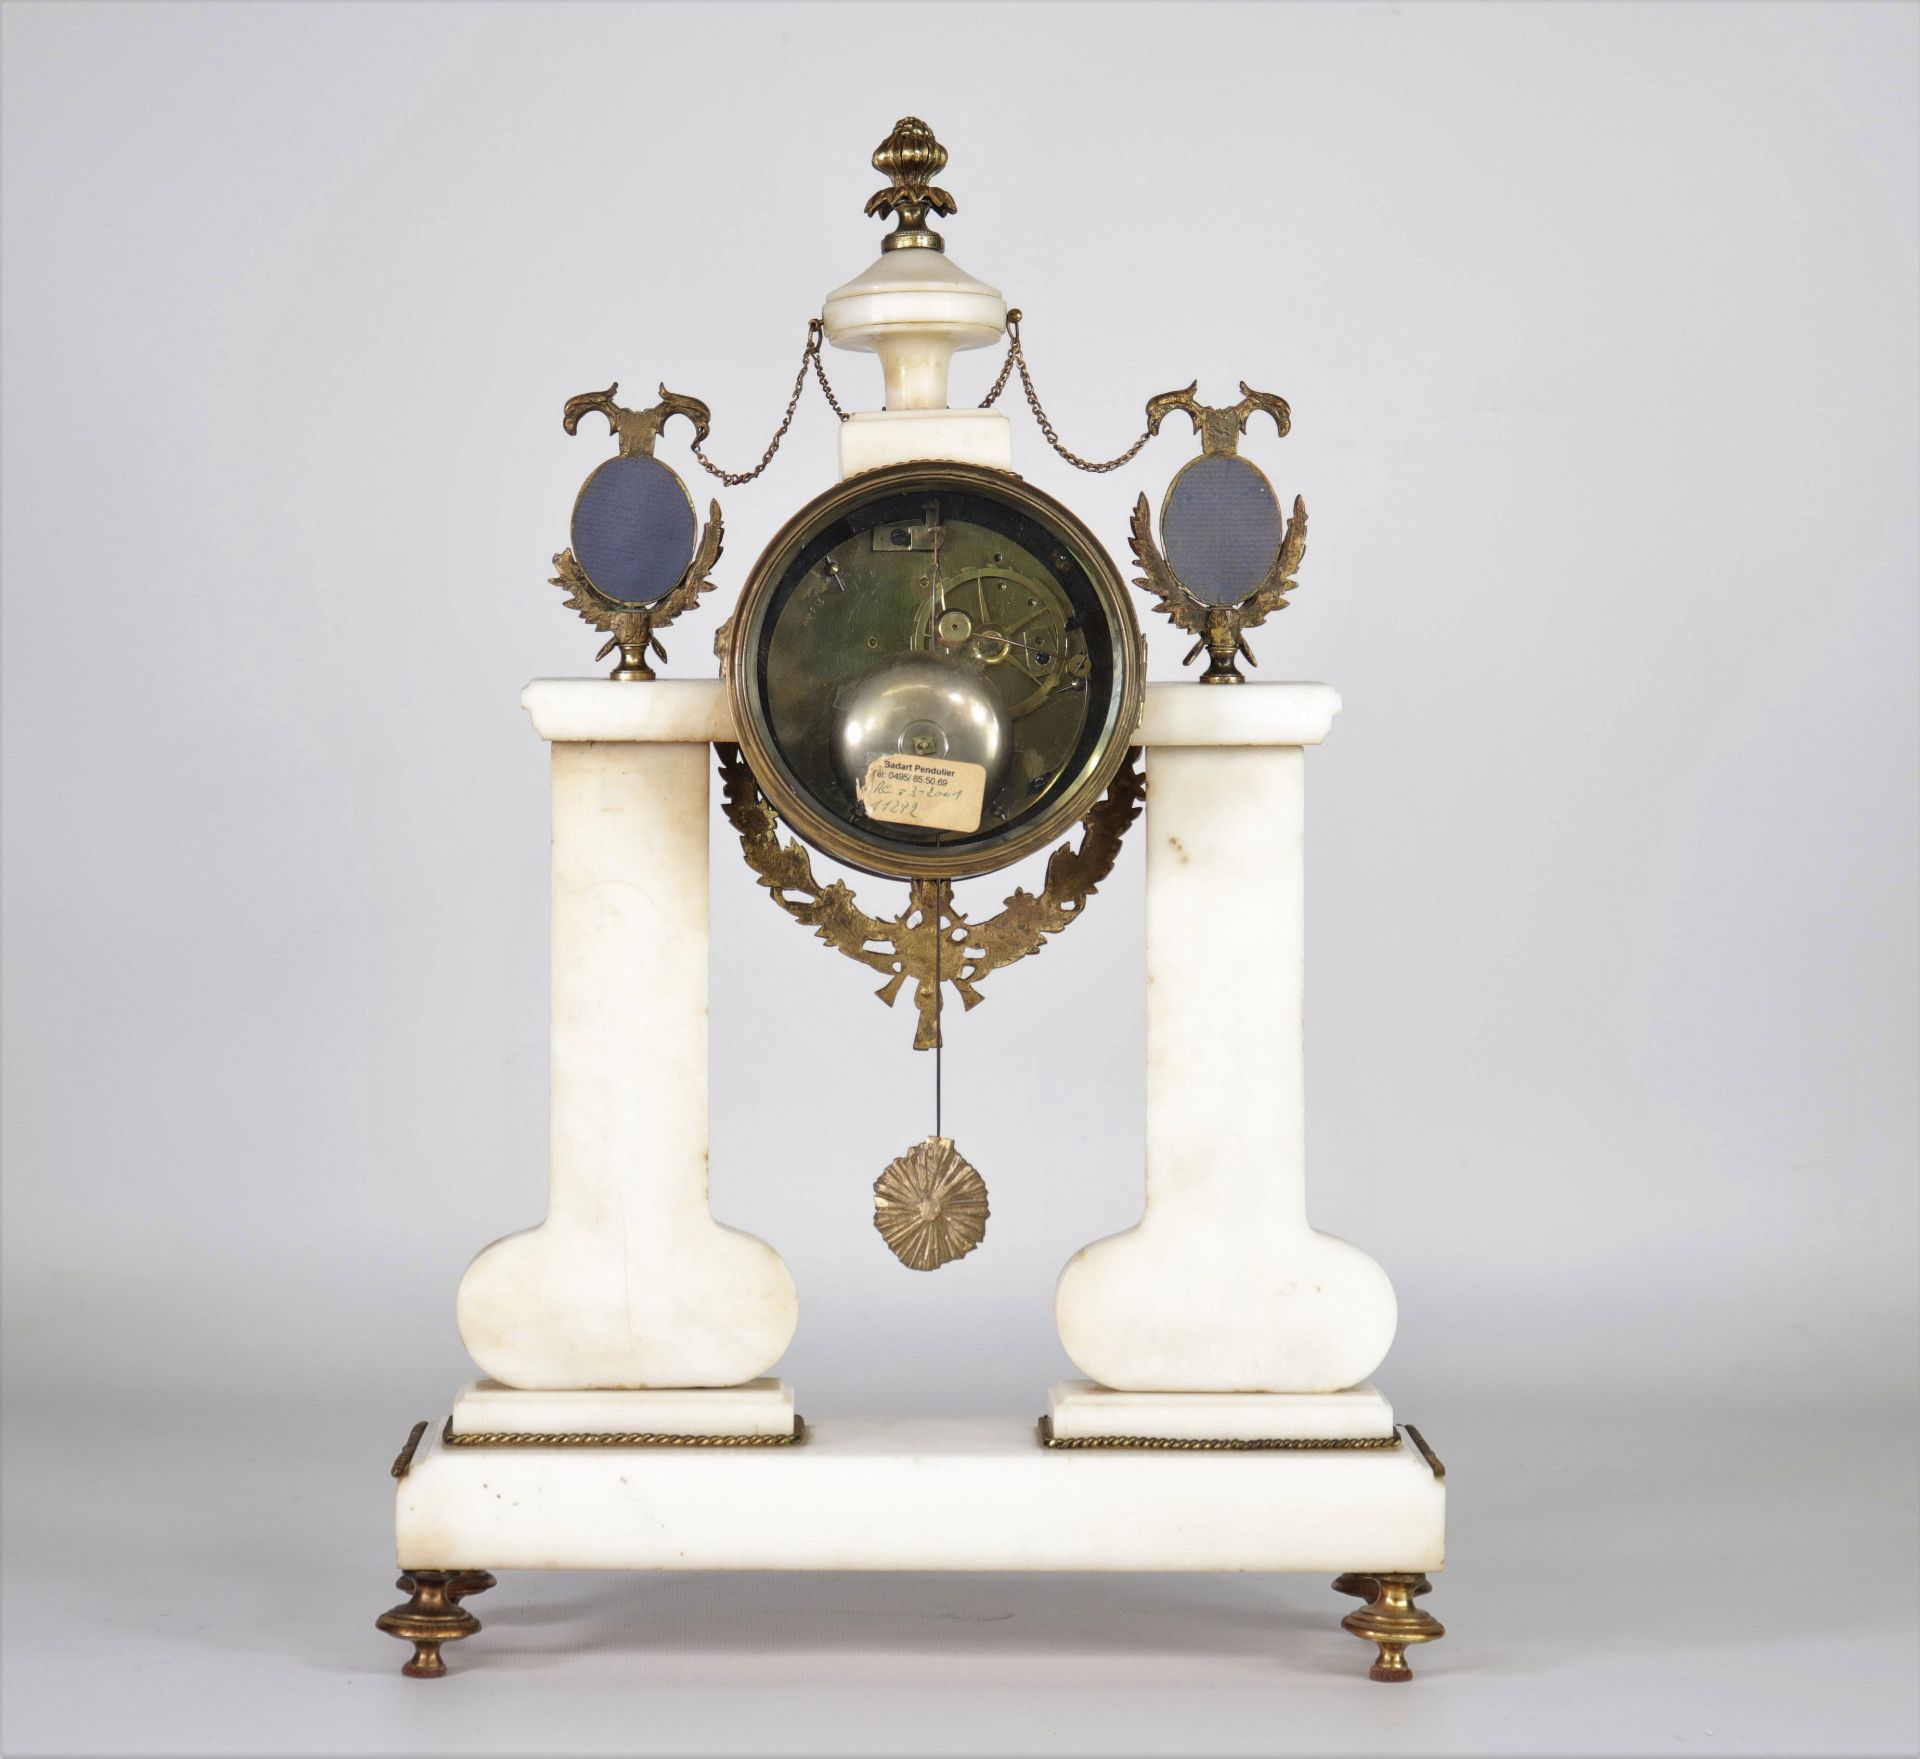 Louis XVI portico clock in white marble and bronze - Image 3 of 3